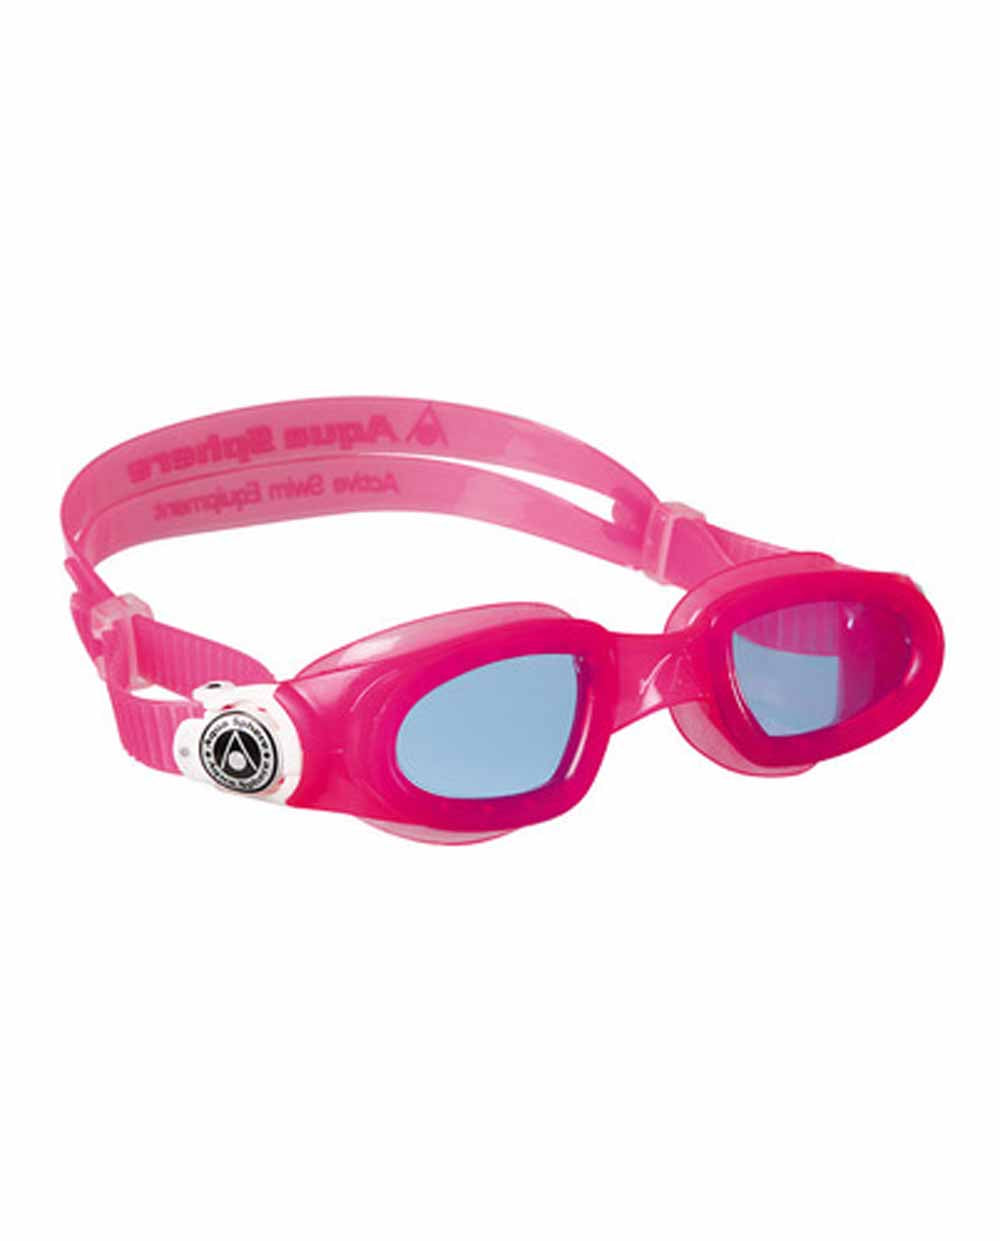 Aqua Sphere Moby Kids Goggle Pink/White/BlueLens